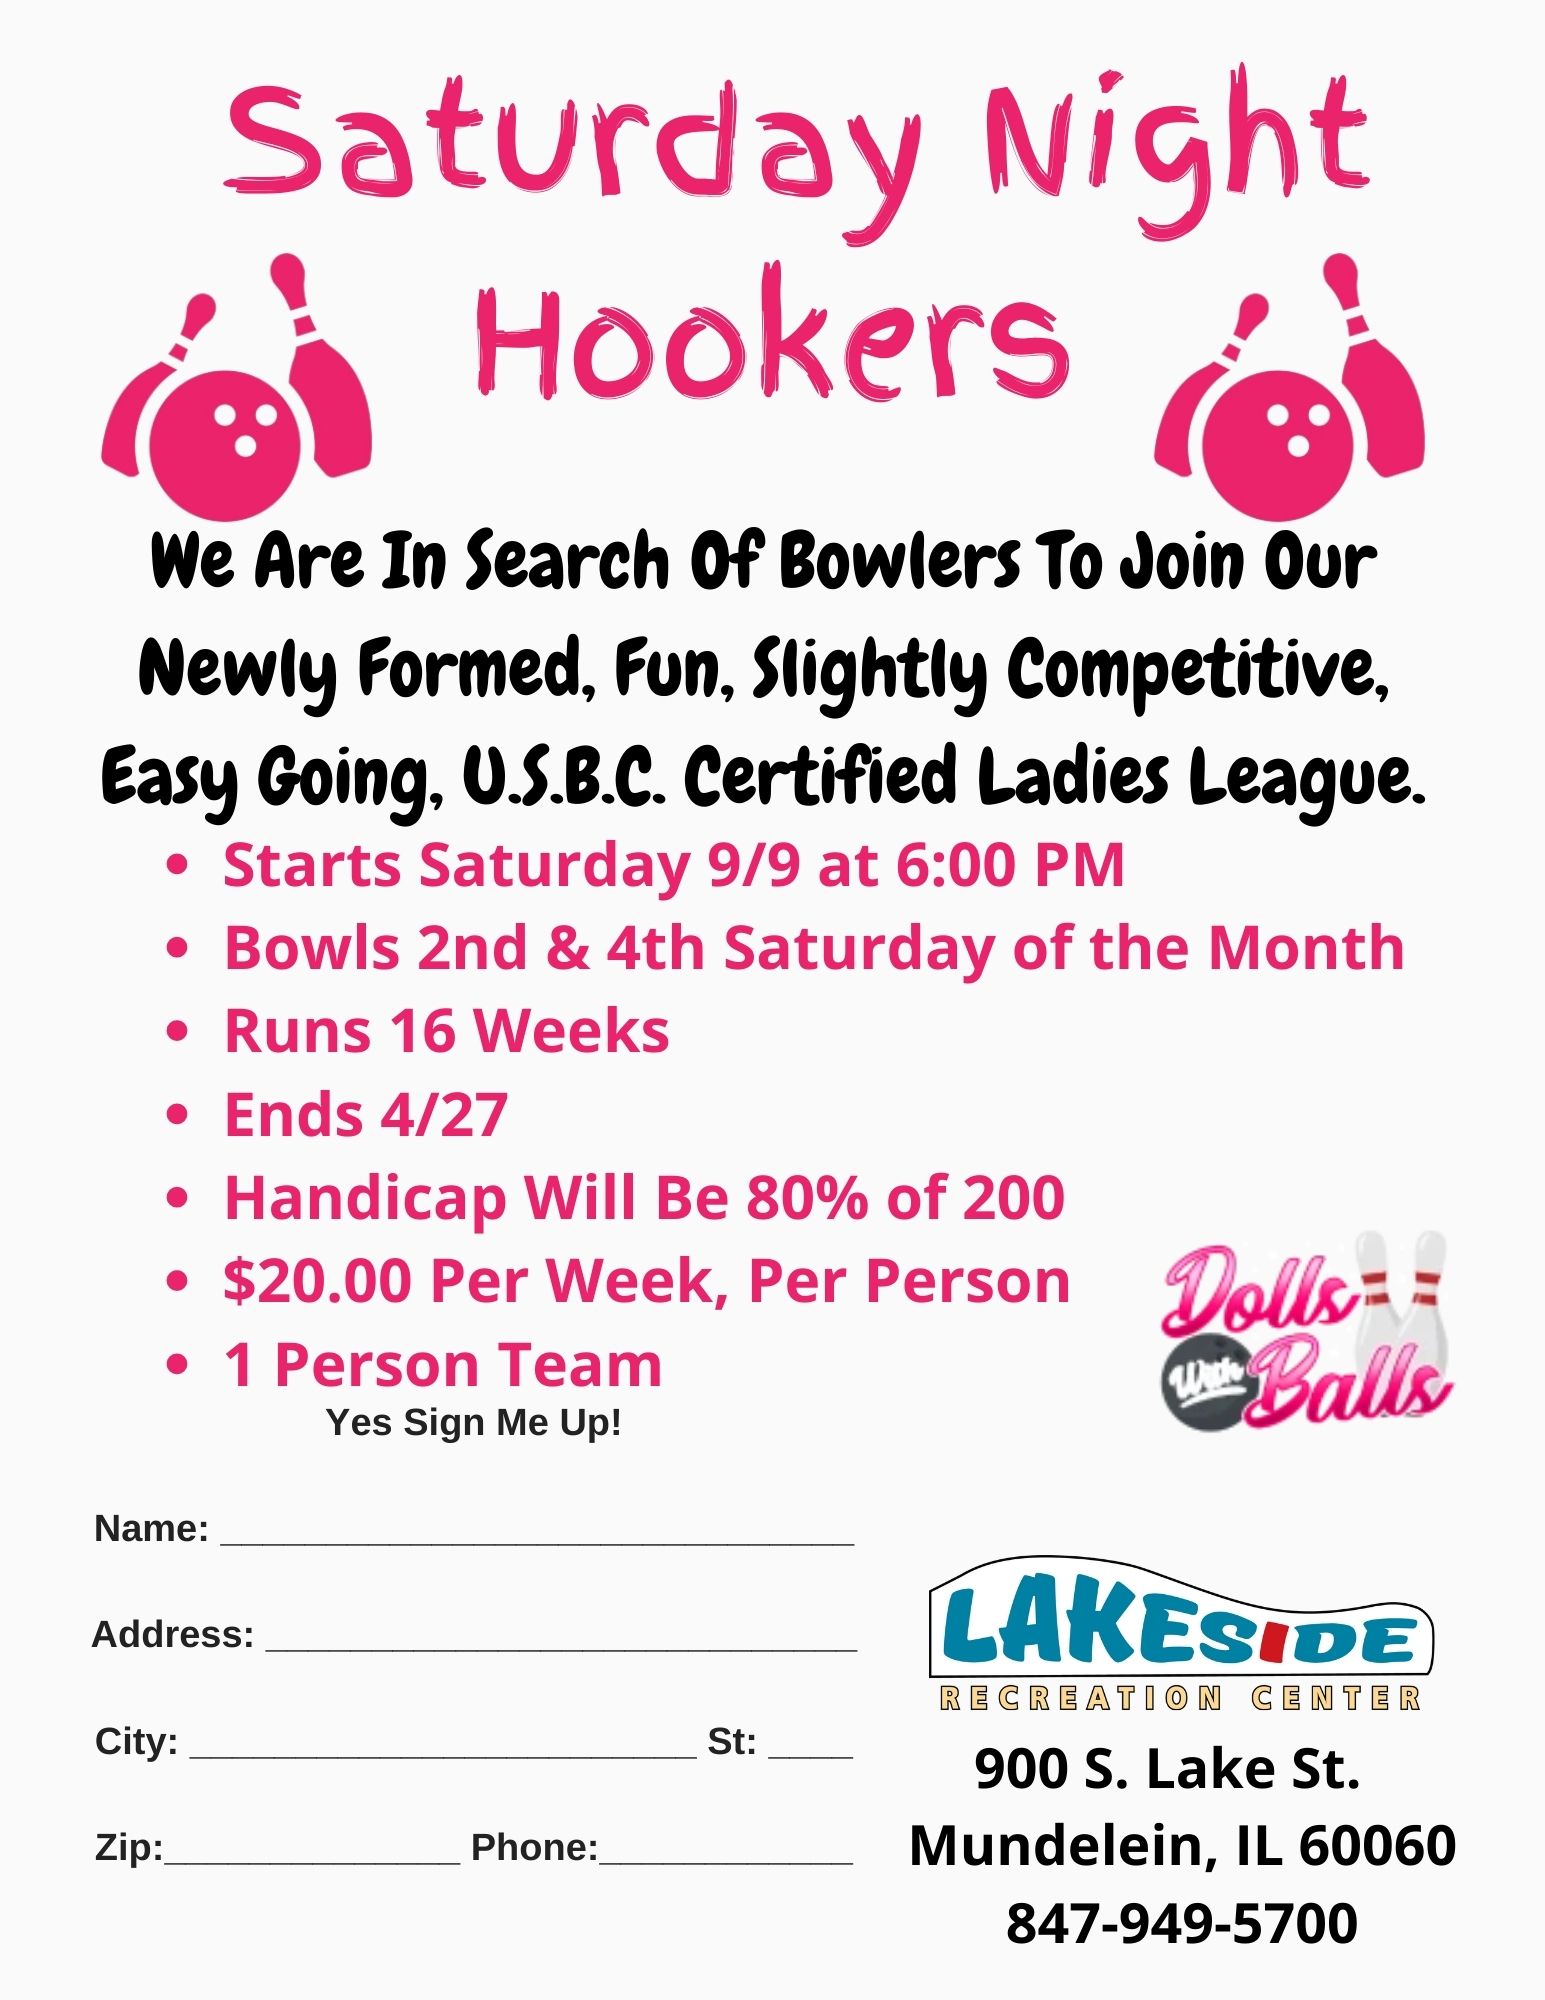 Saturday Night Hookers, Women's Singles League at Lakeside Recreation Center